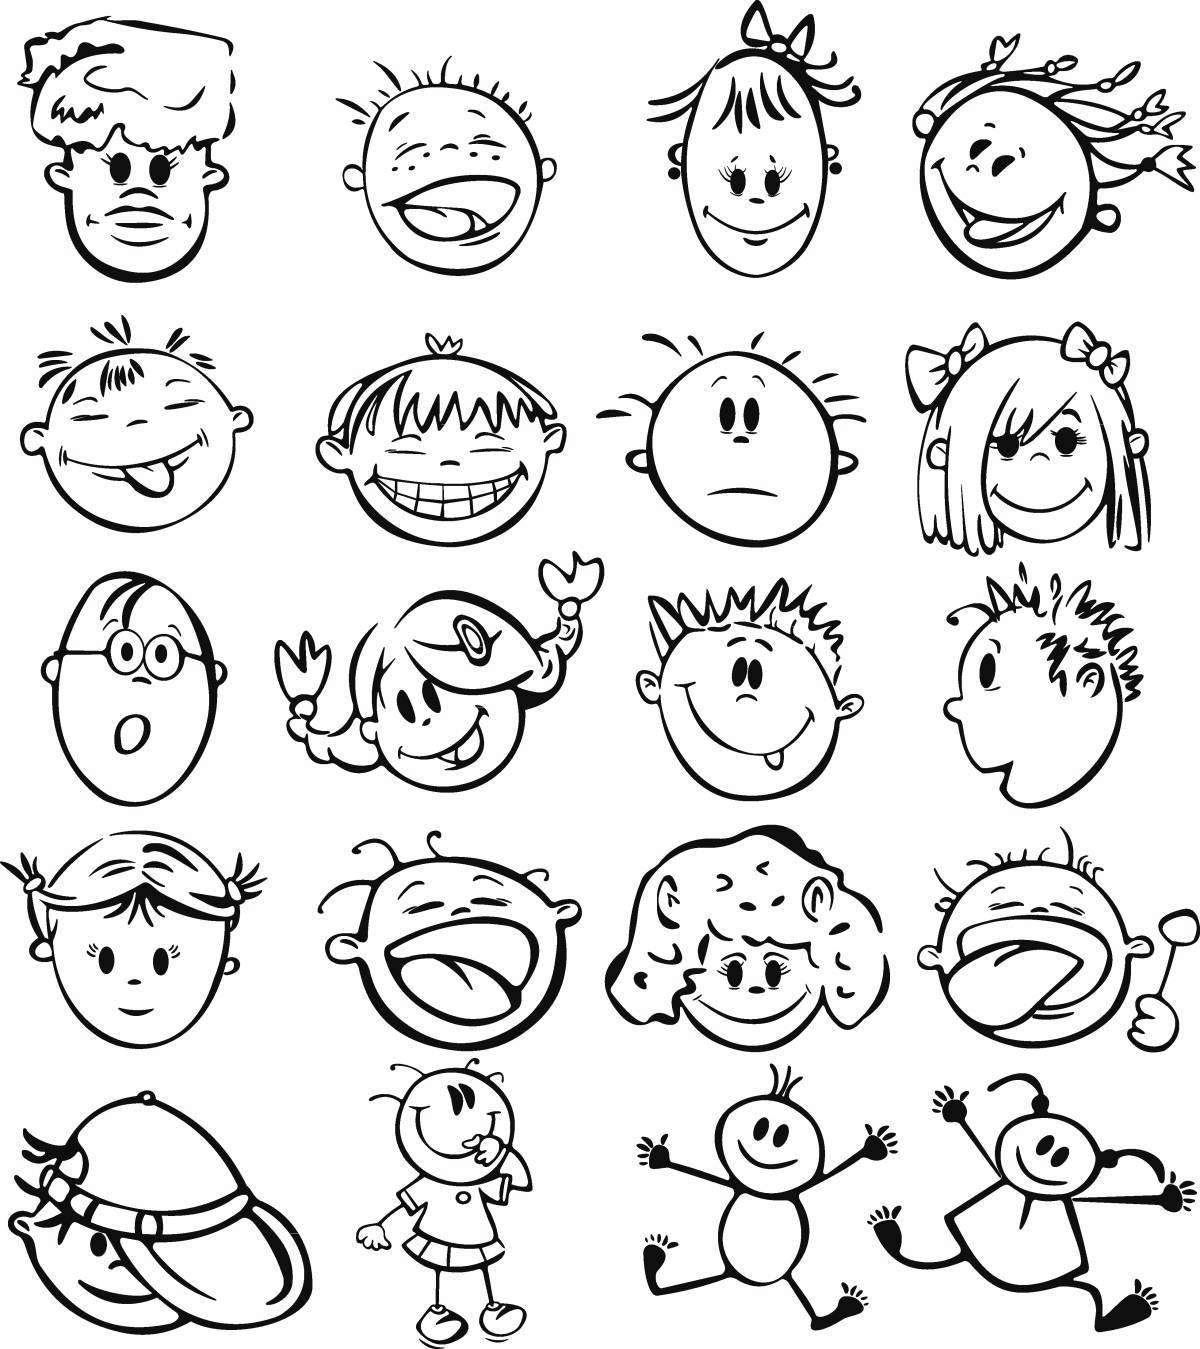 Disturbed expression coloring pages for kids